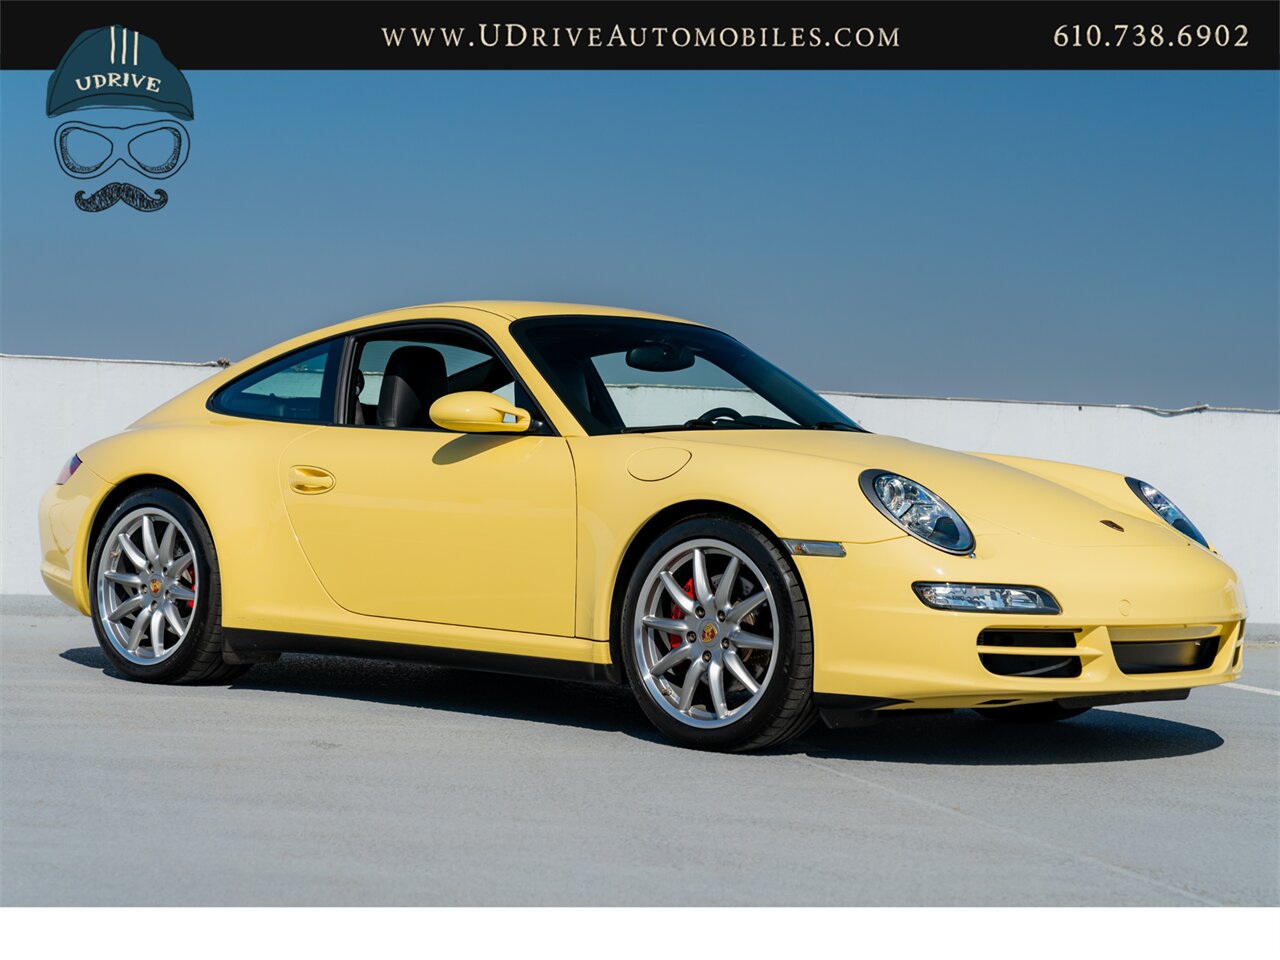 2007 Porsche 911 Carrera 4S 997 C4S Paint To Sample Pastel Yellow  6 Speed Sport Chrono Full Leather Yellow Gauges - Photo 14 - West Chester, PA 19382